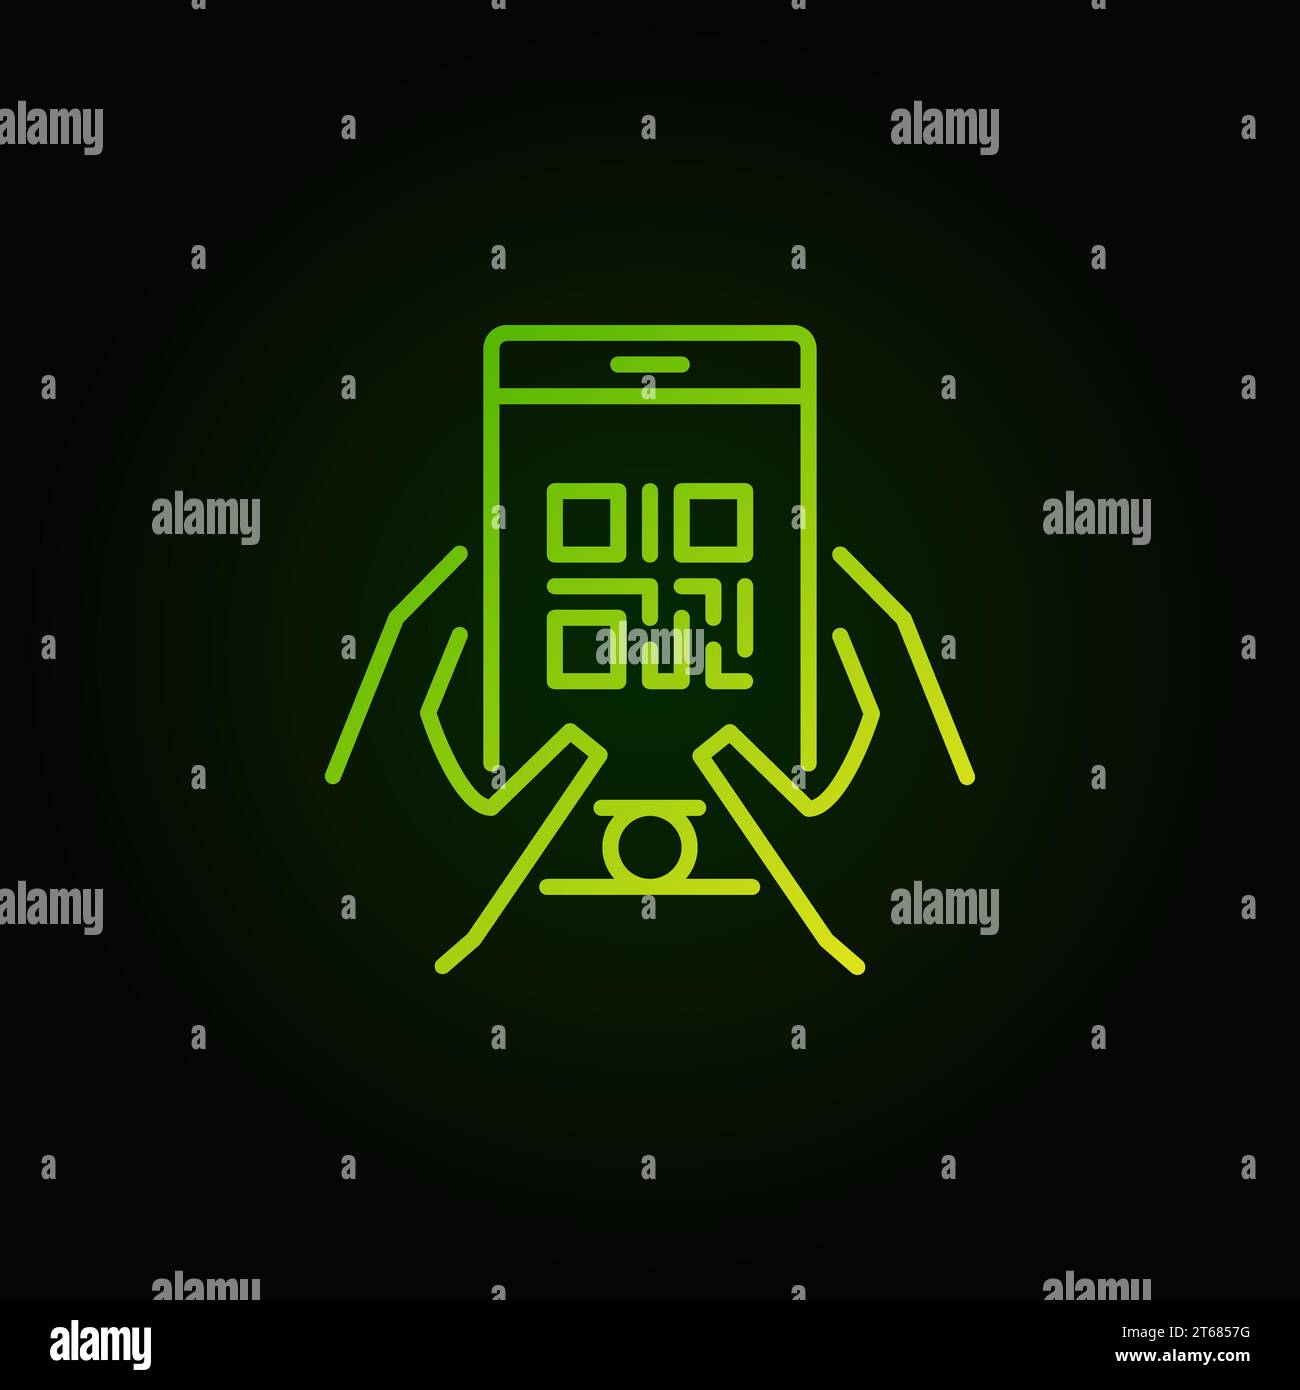 QR code in smartphone green vector icon or symbol in thin line style on dark background Stock Vector